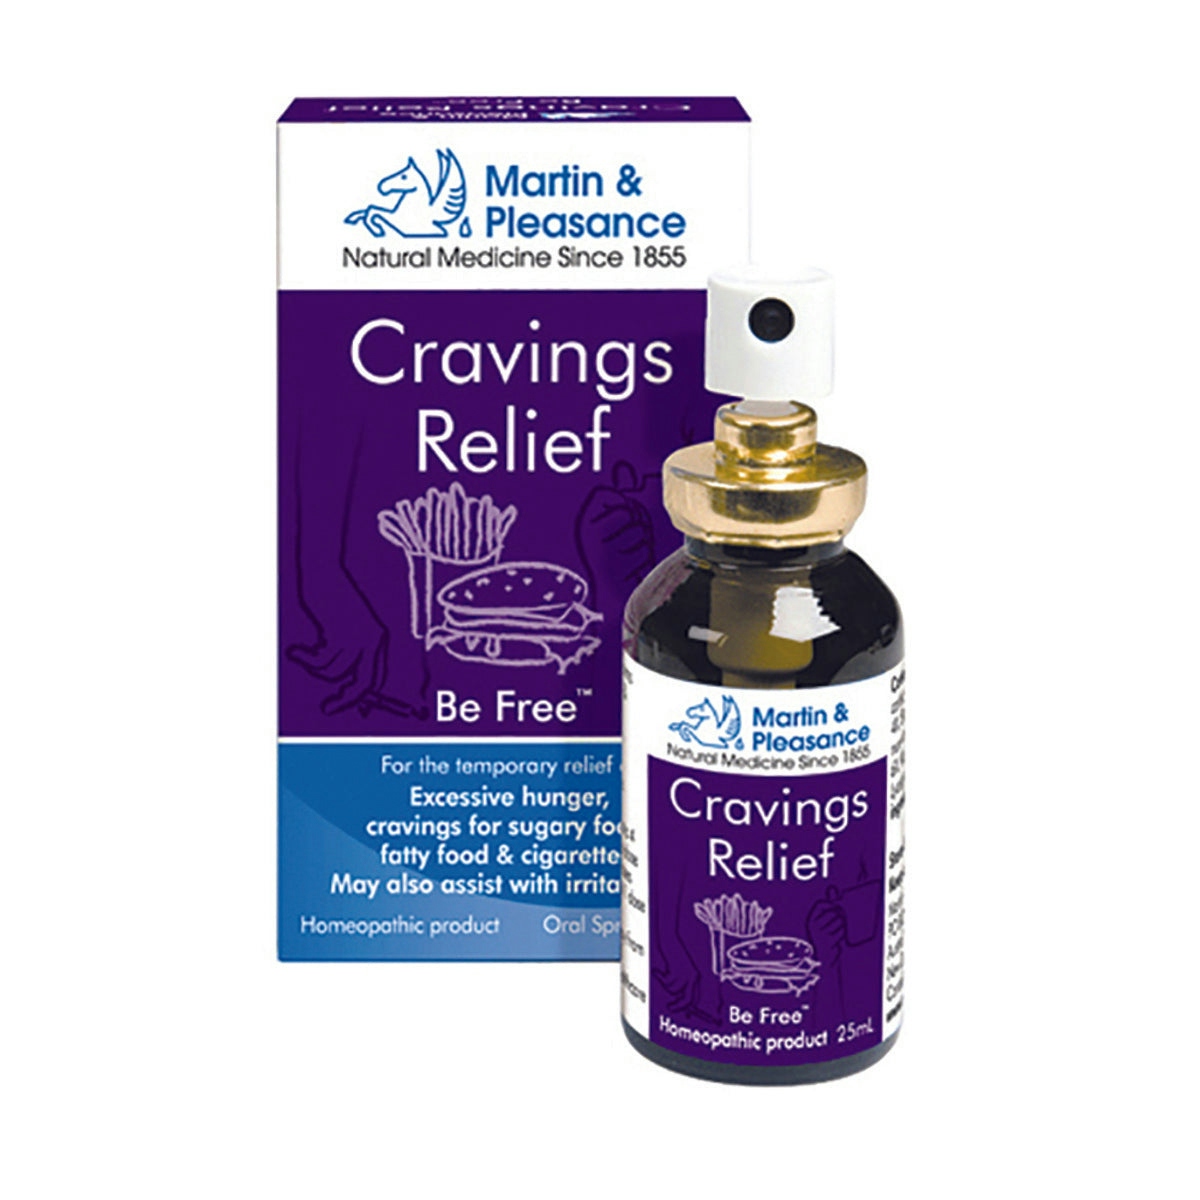 image of Martin & Pleasance Homoeopathic Complexes Cravings Relief Spray 25ml on white background